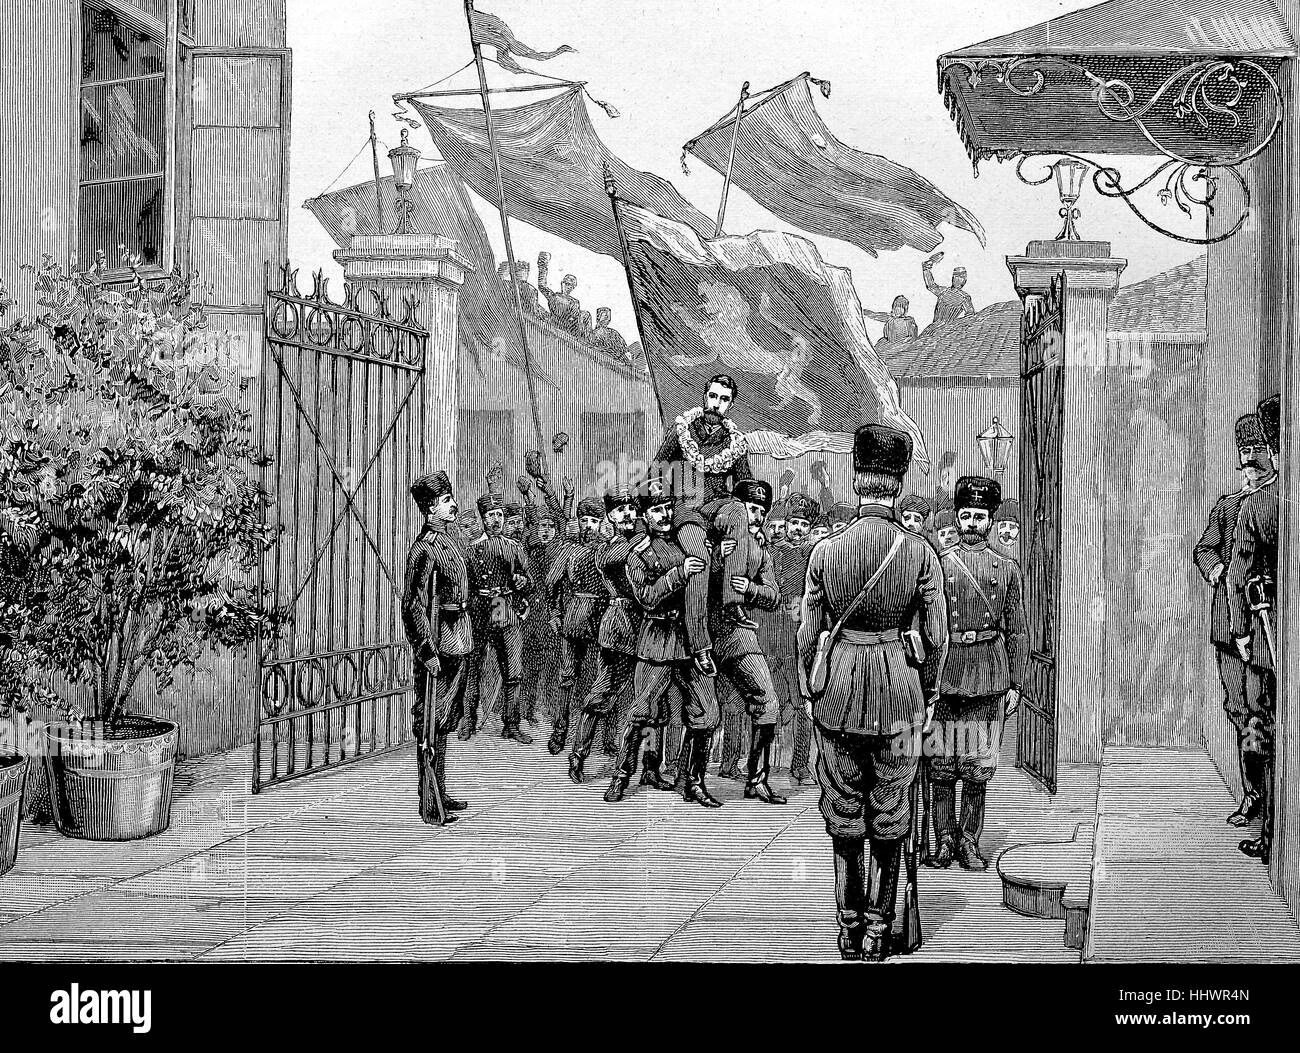 Alexander I, Prince of Bulgaria, who was elected from 1879 to 1886, was carried by the Bulgarian officers to the princely Palace in Rustschuk, the last tribute before his resignation, historical image or illustration, published 1890, digital improved Stock Photo